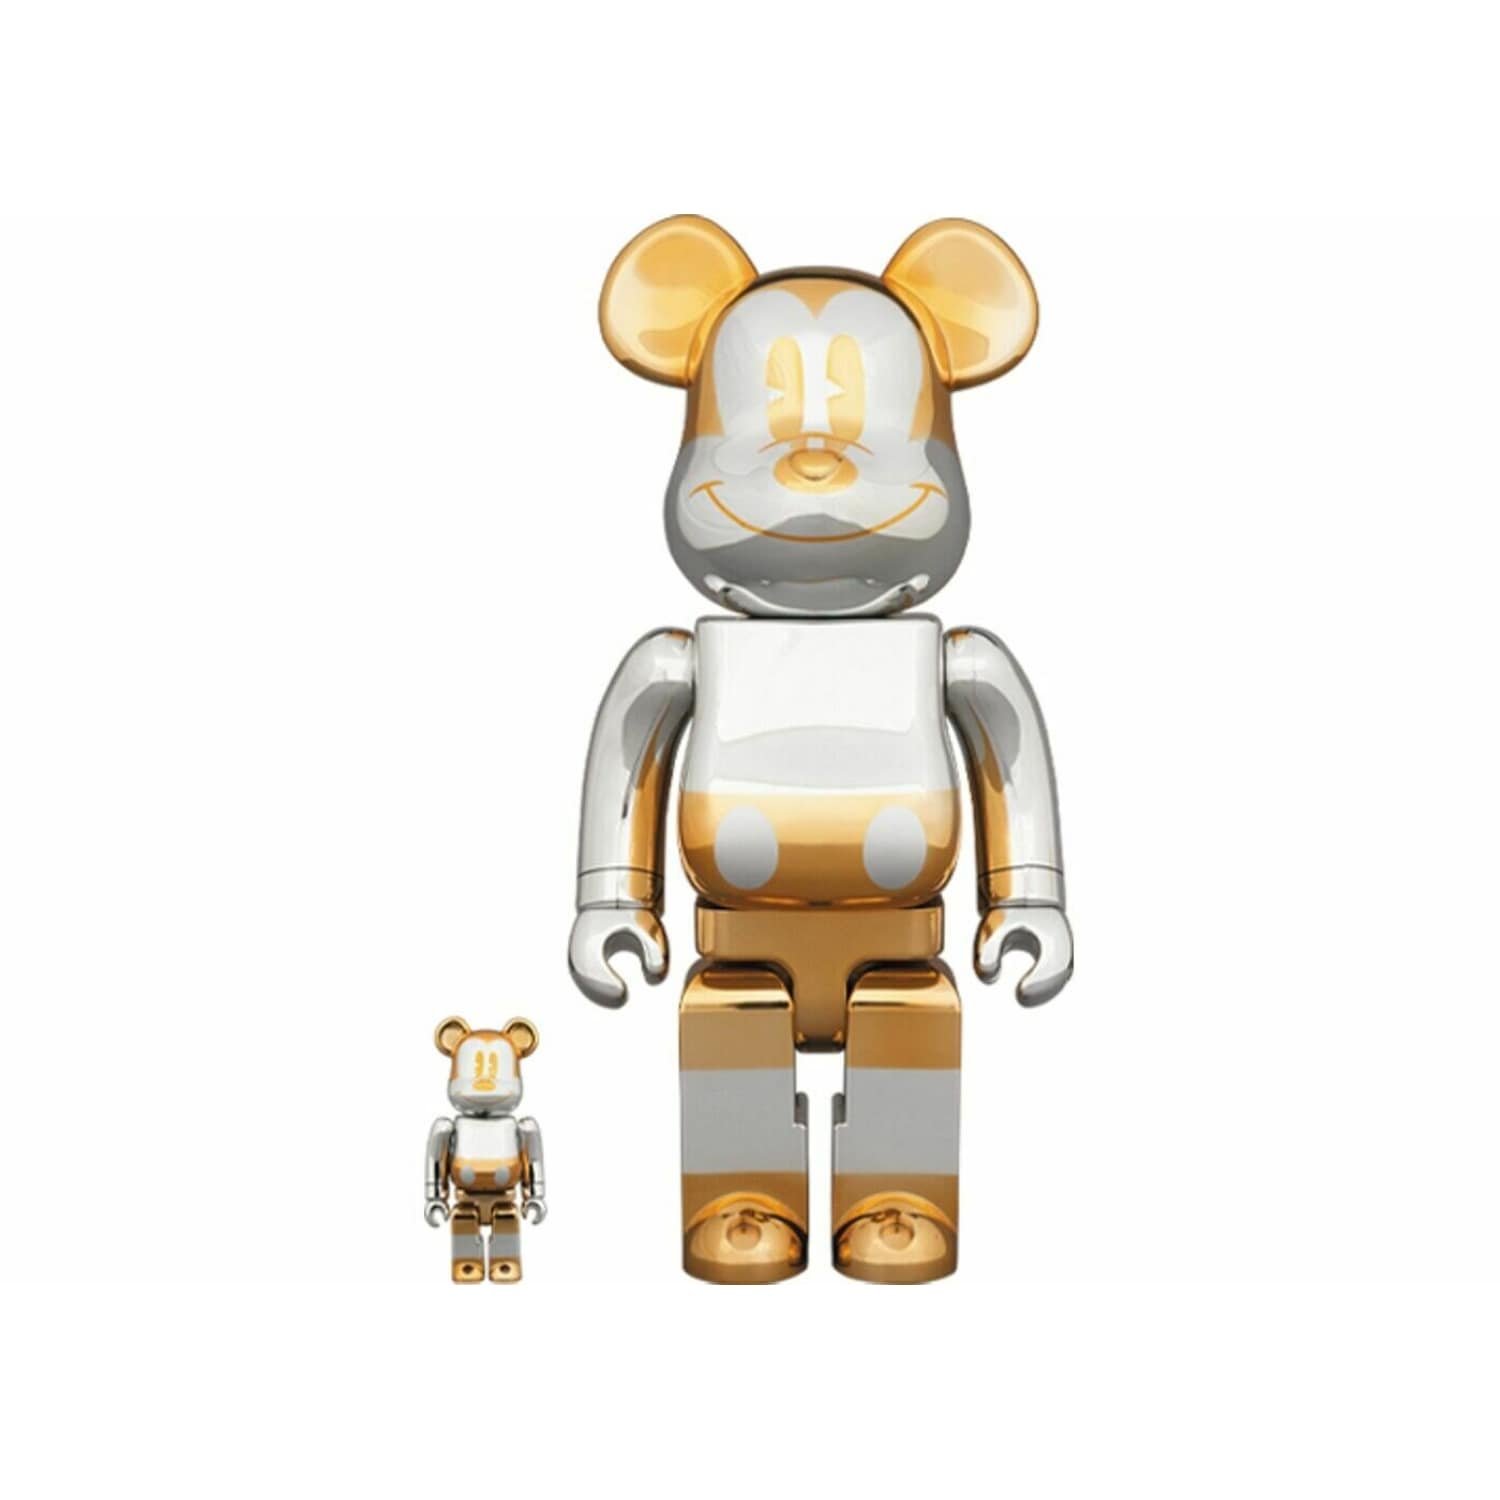 Be@rbricks Authentic and Rare artworks - Dope! Gallery